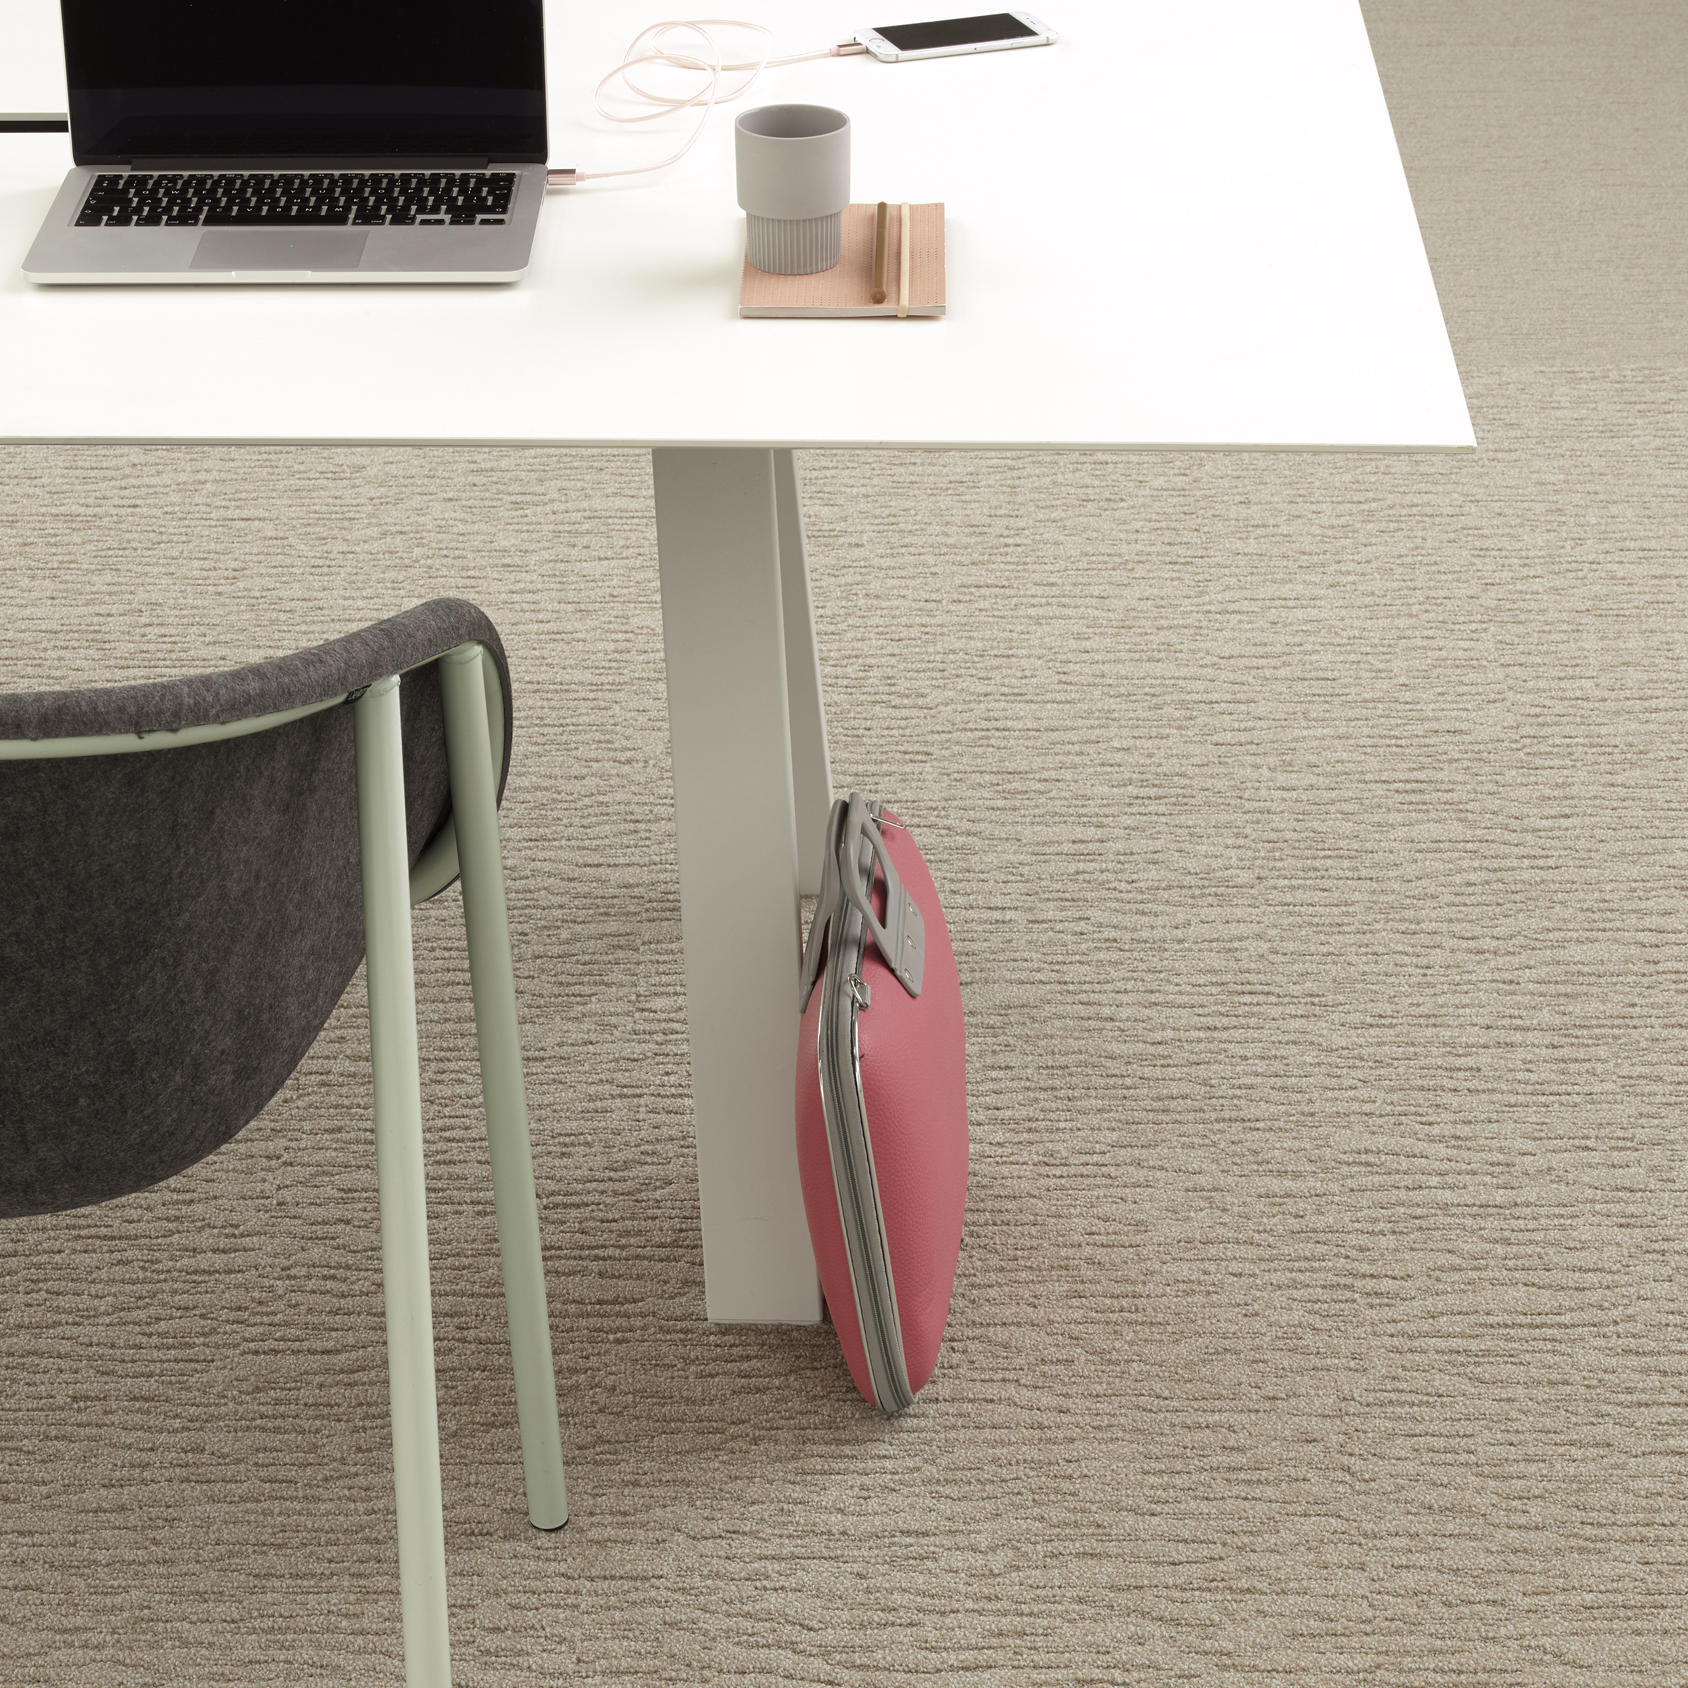 Desso Carved Carpet Tile in an office setting